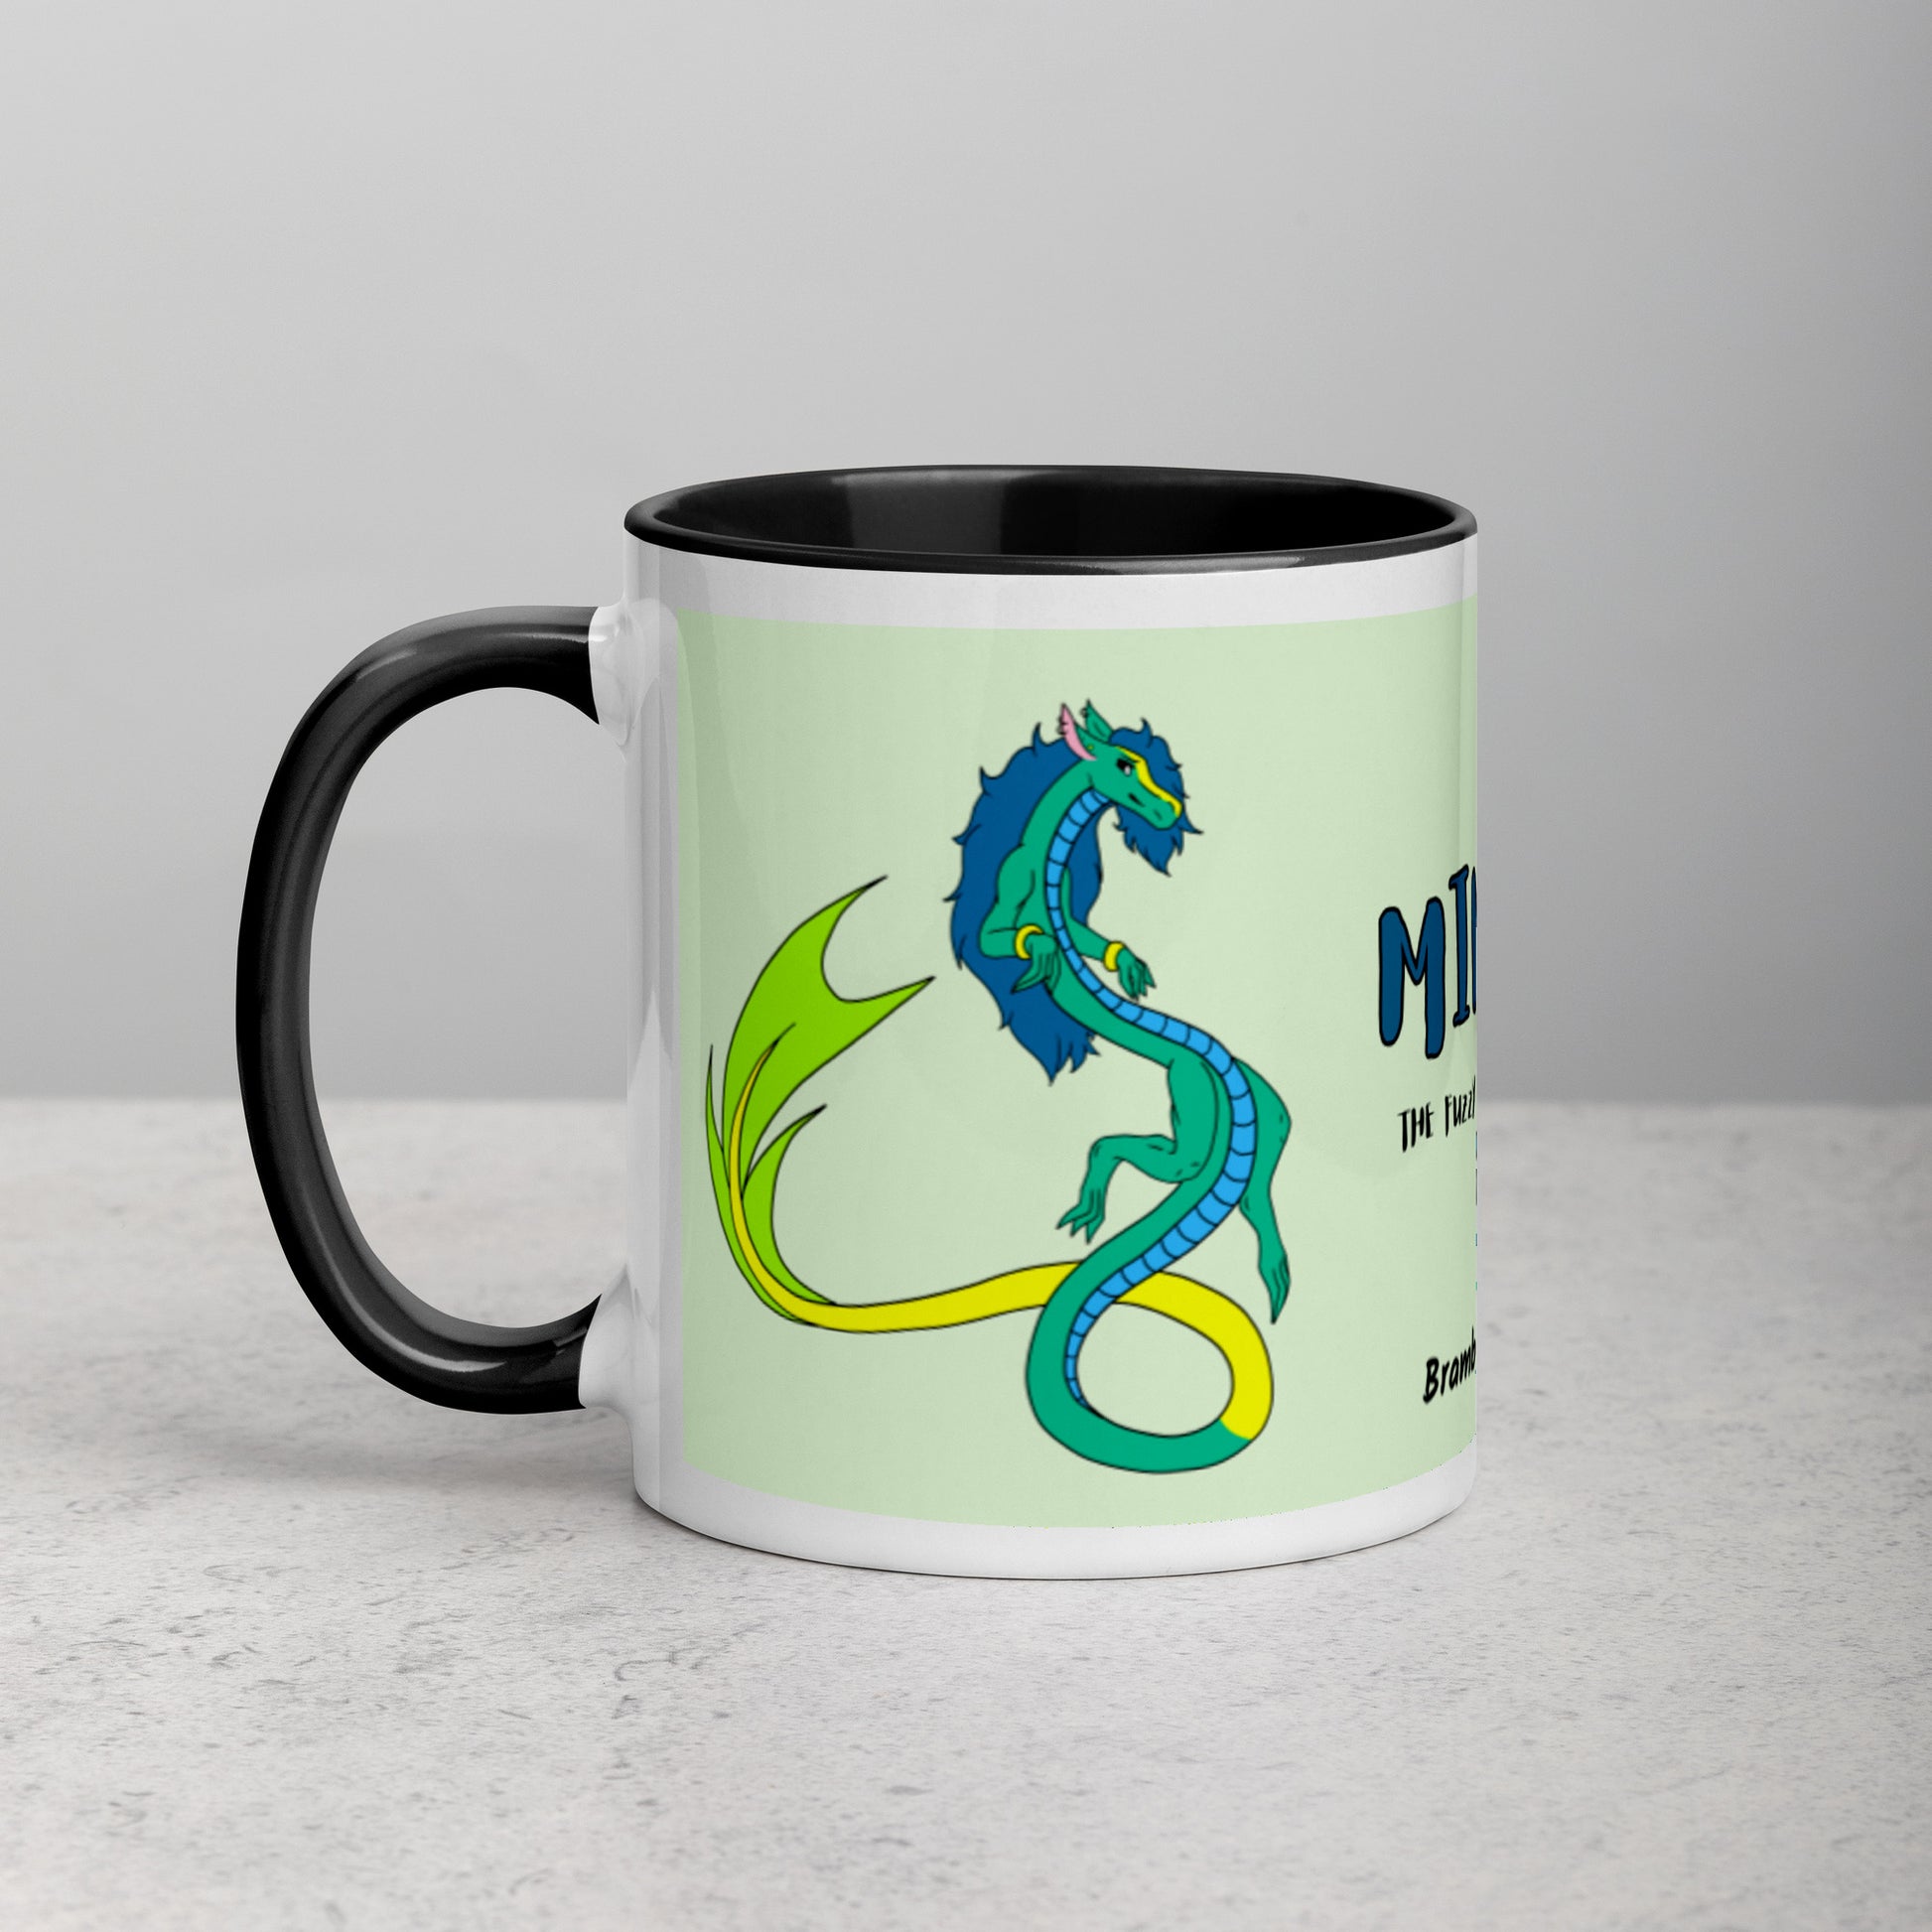 11 ounce white ceramic mug. Black inside and handle. Features double-sided image of Mikori the Fuzzy Noodle Dragon. Shown on tabletop.